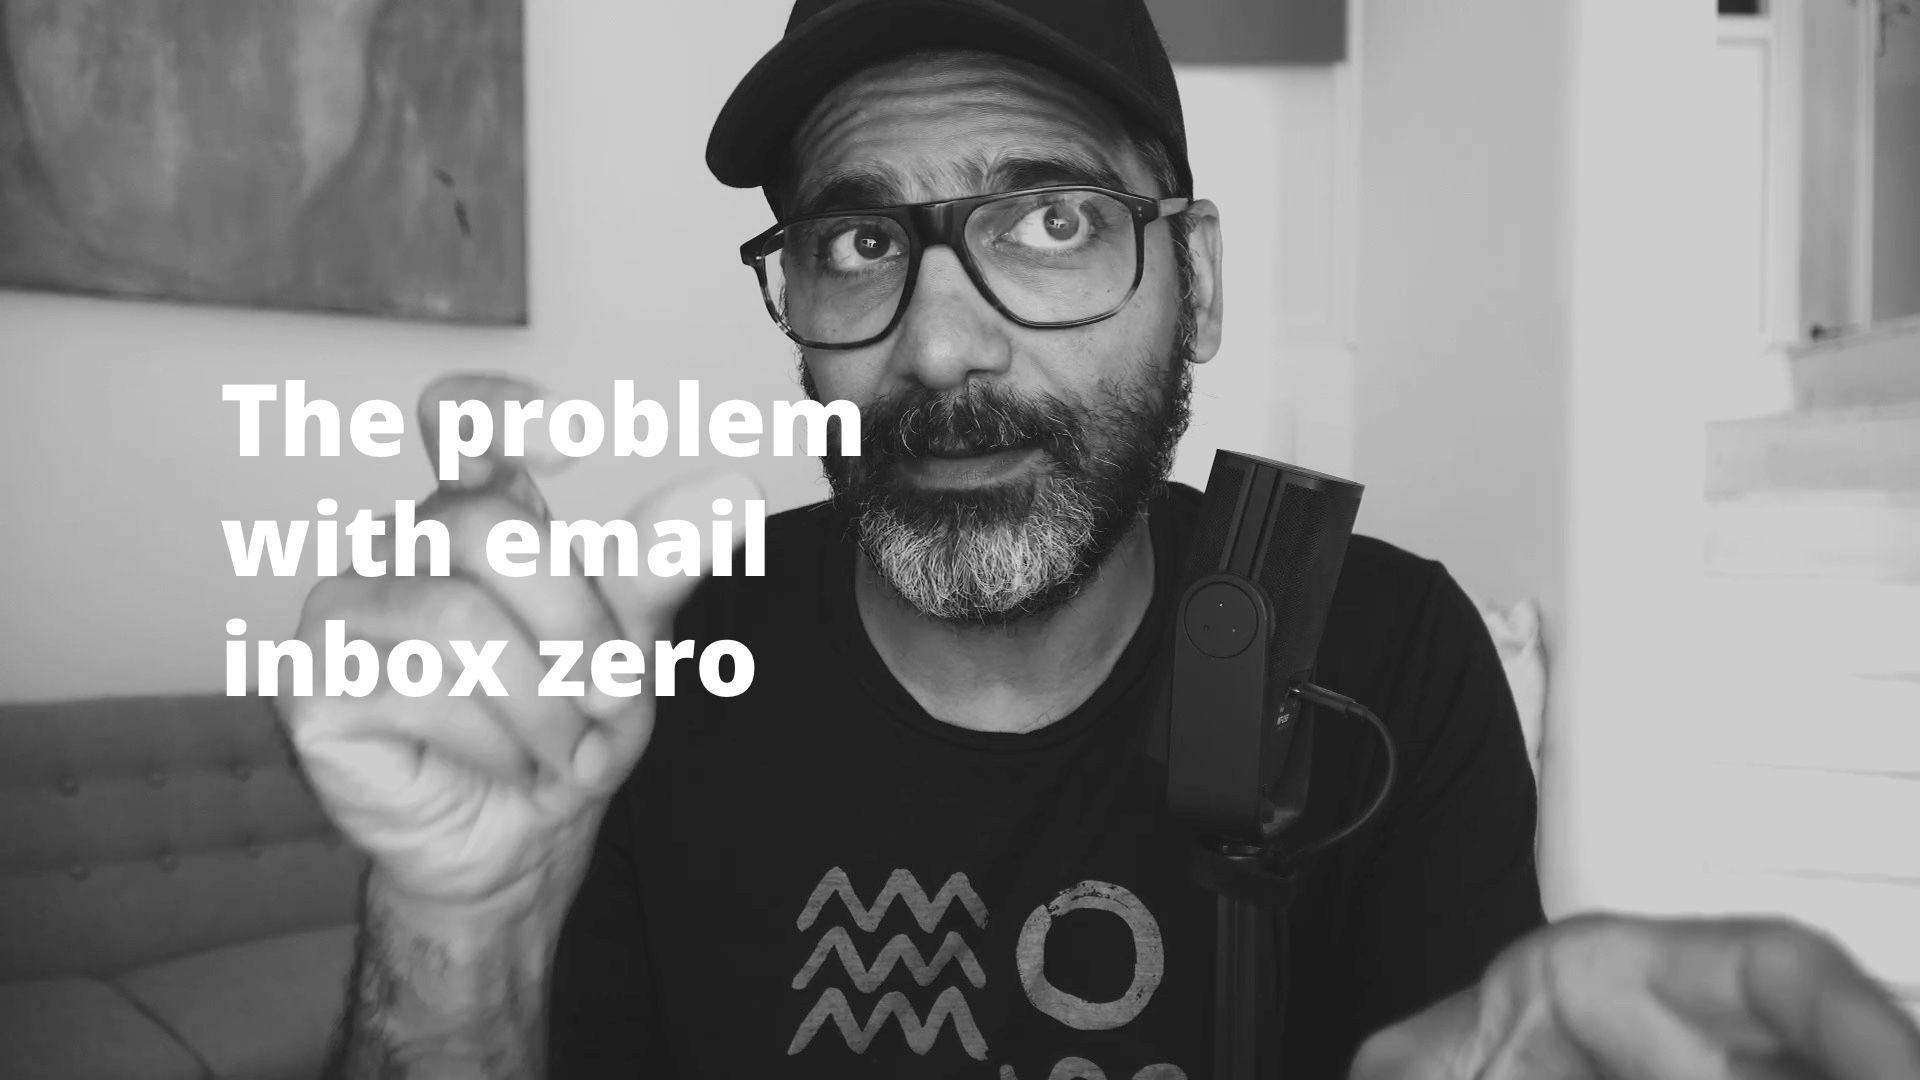 The problem with email inbox zero